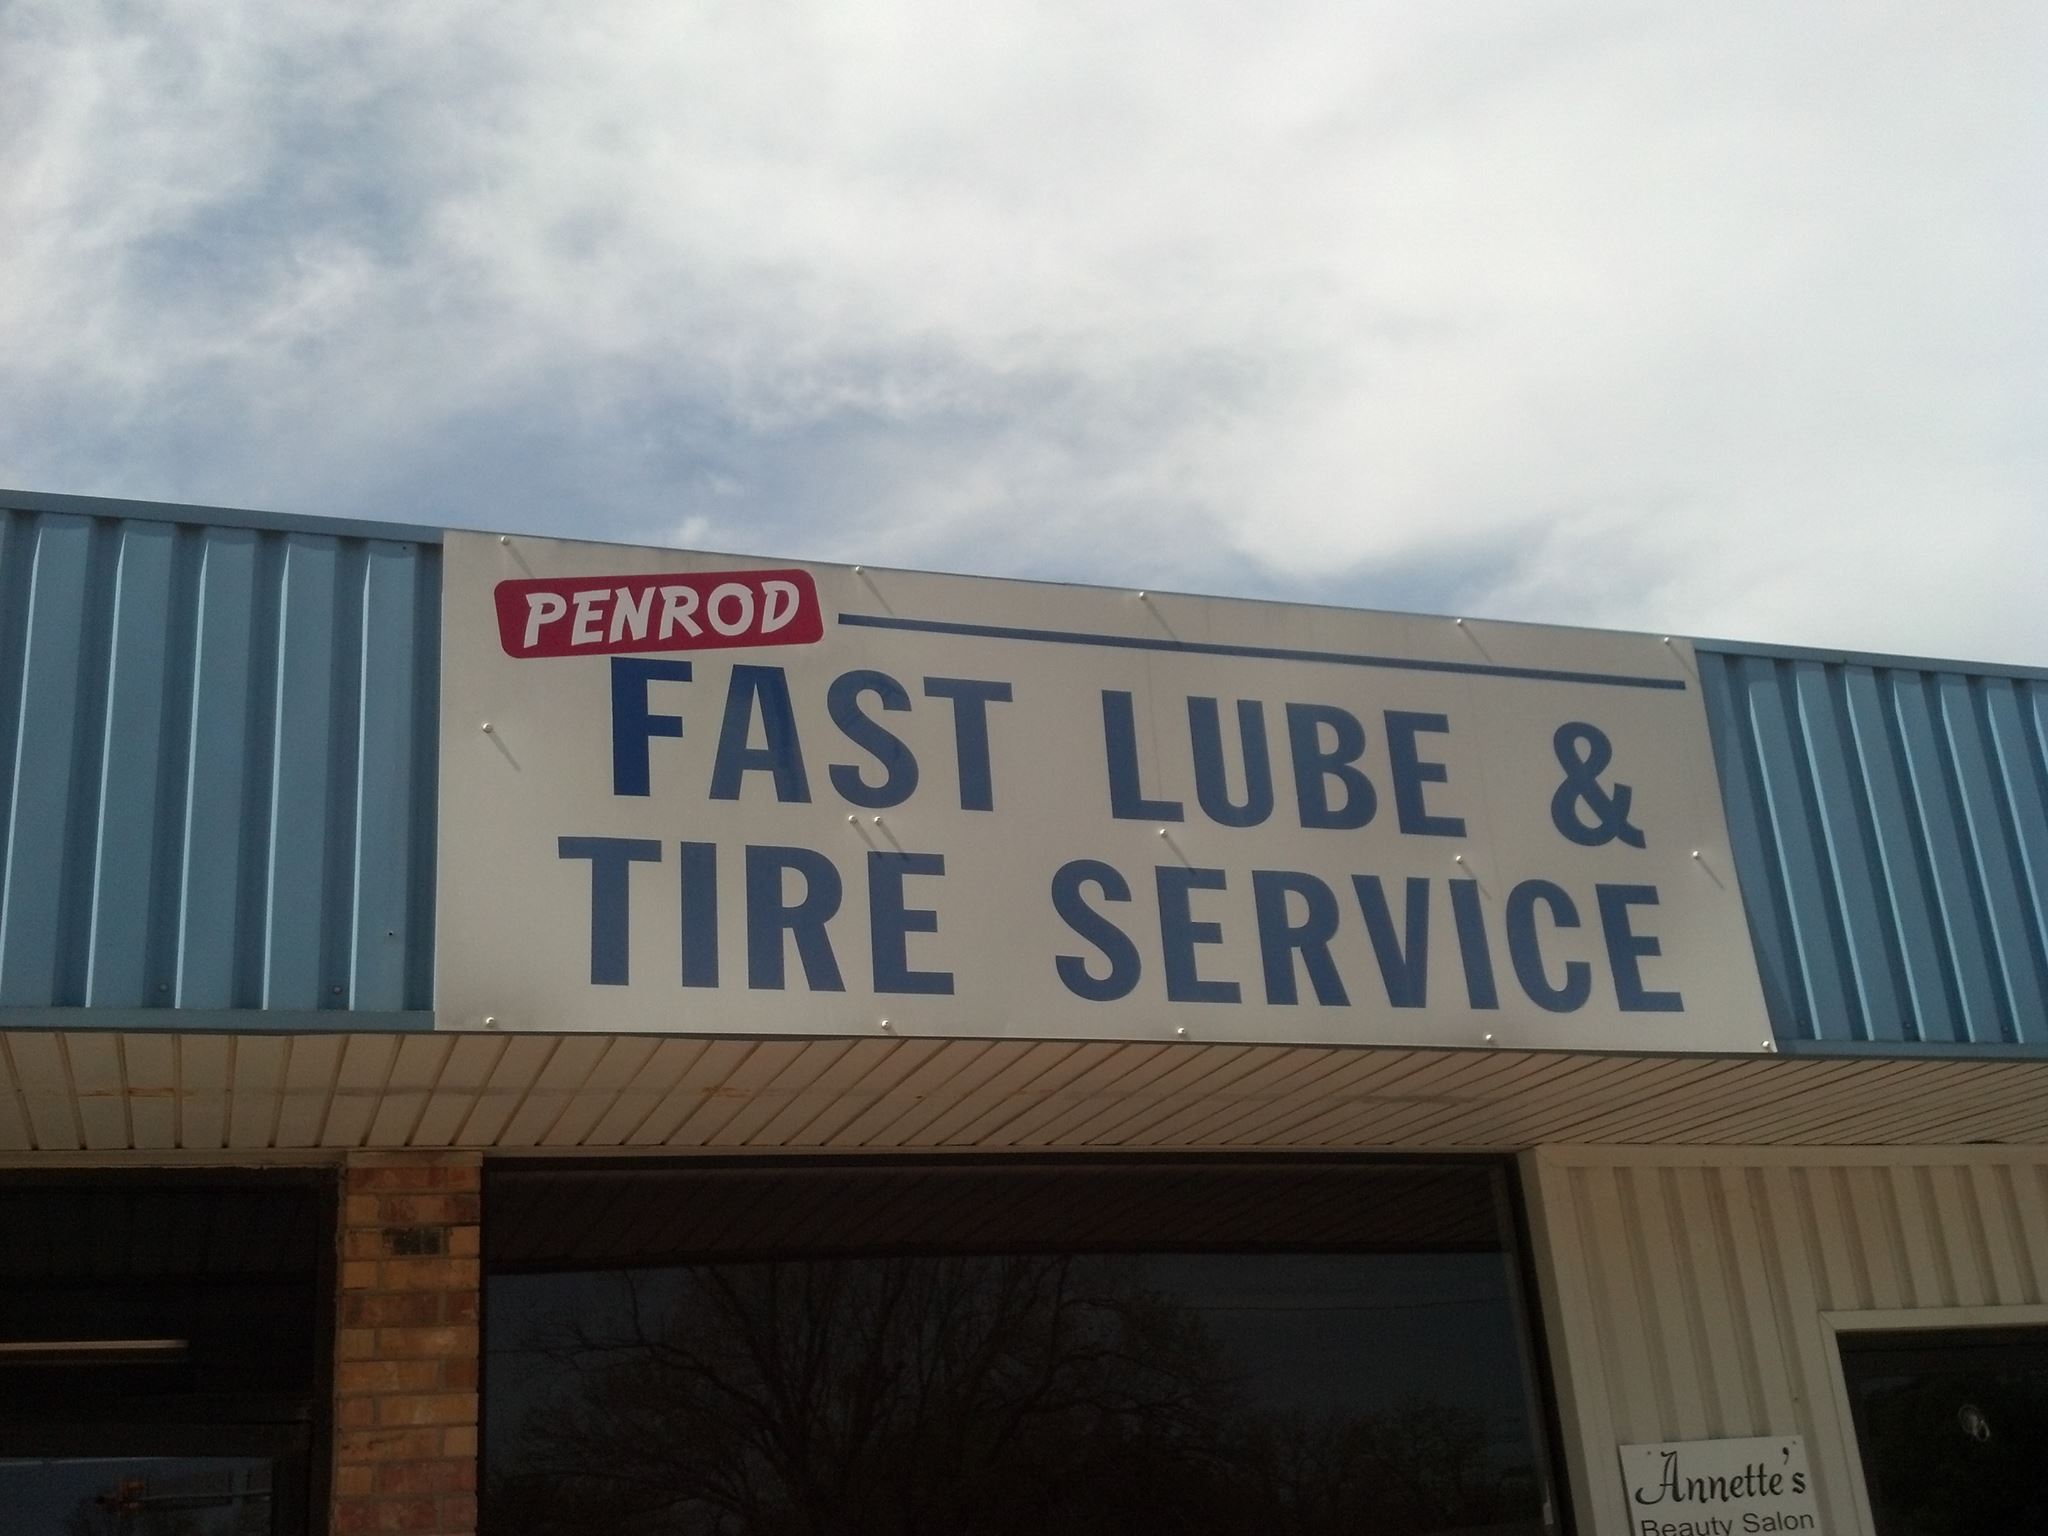 PENROD FAST LUBE AND TIRE SERVICE